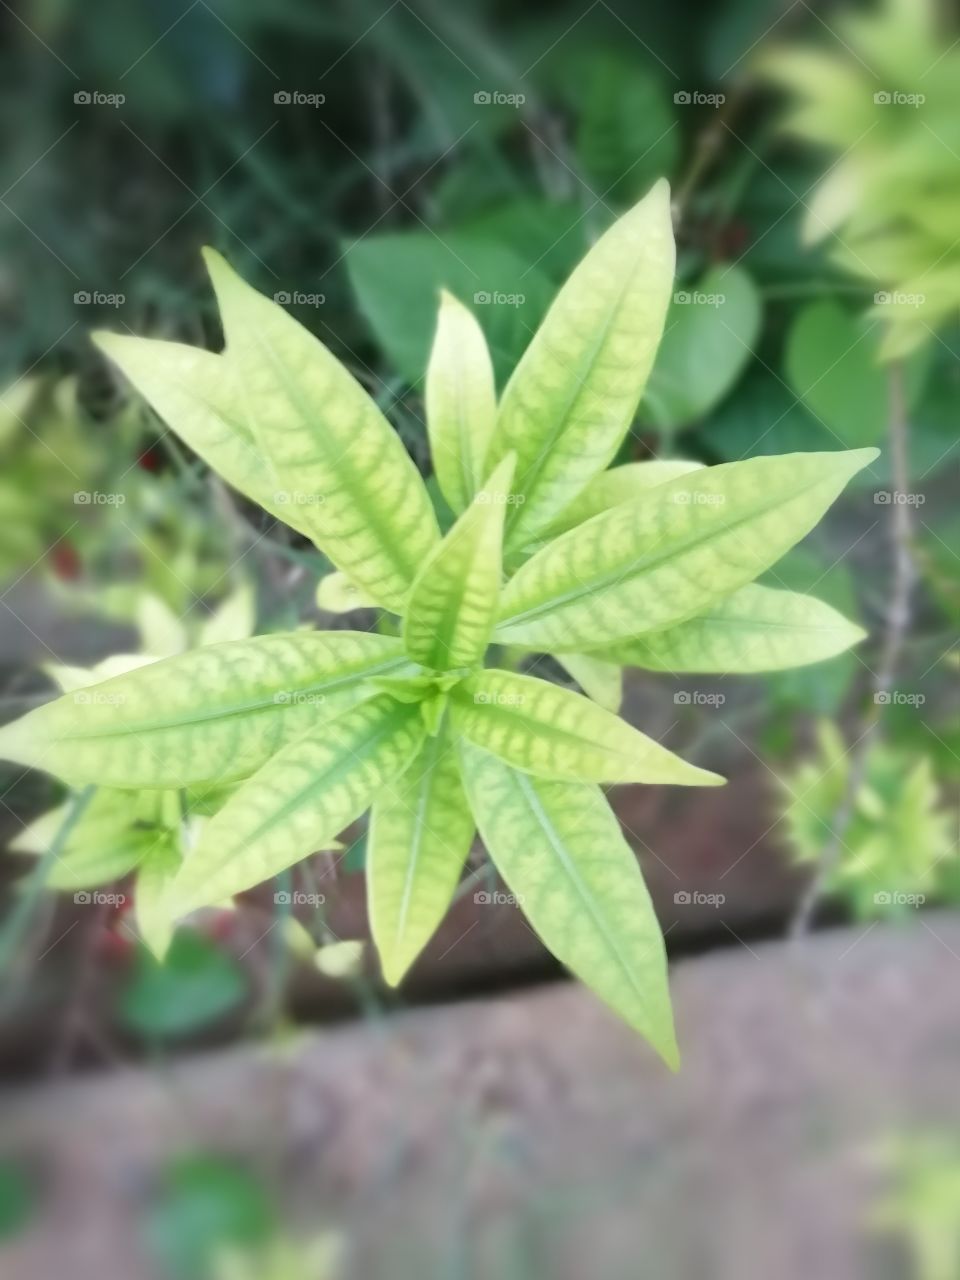 Star shaped fresh gree leaves of a plant